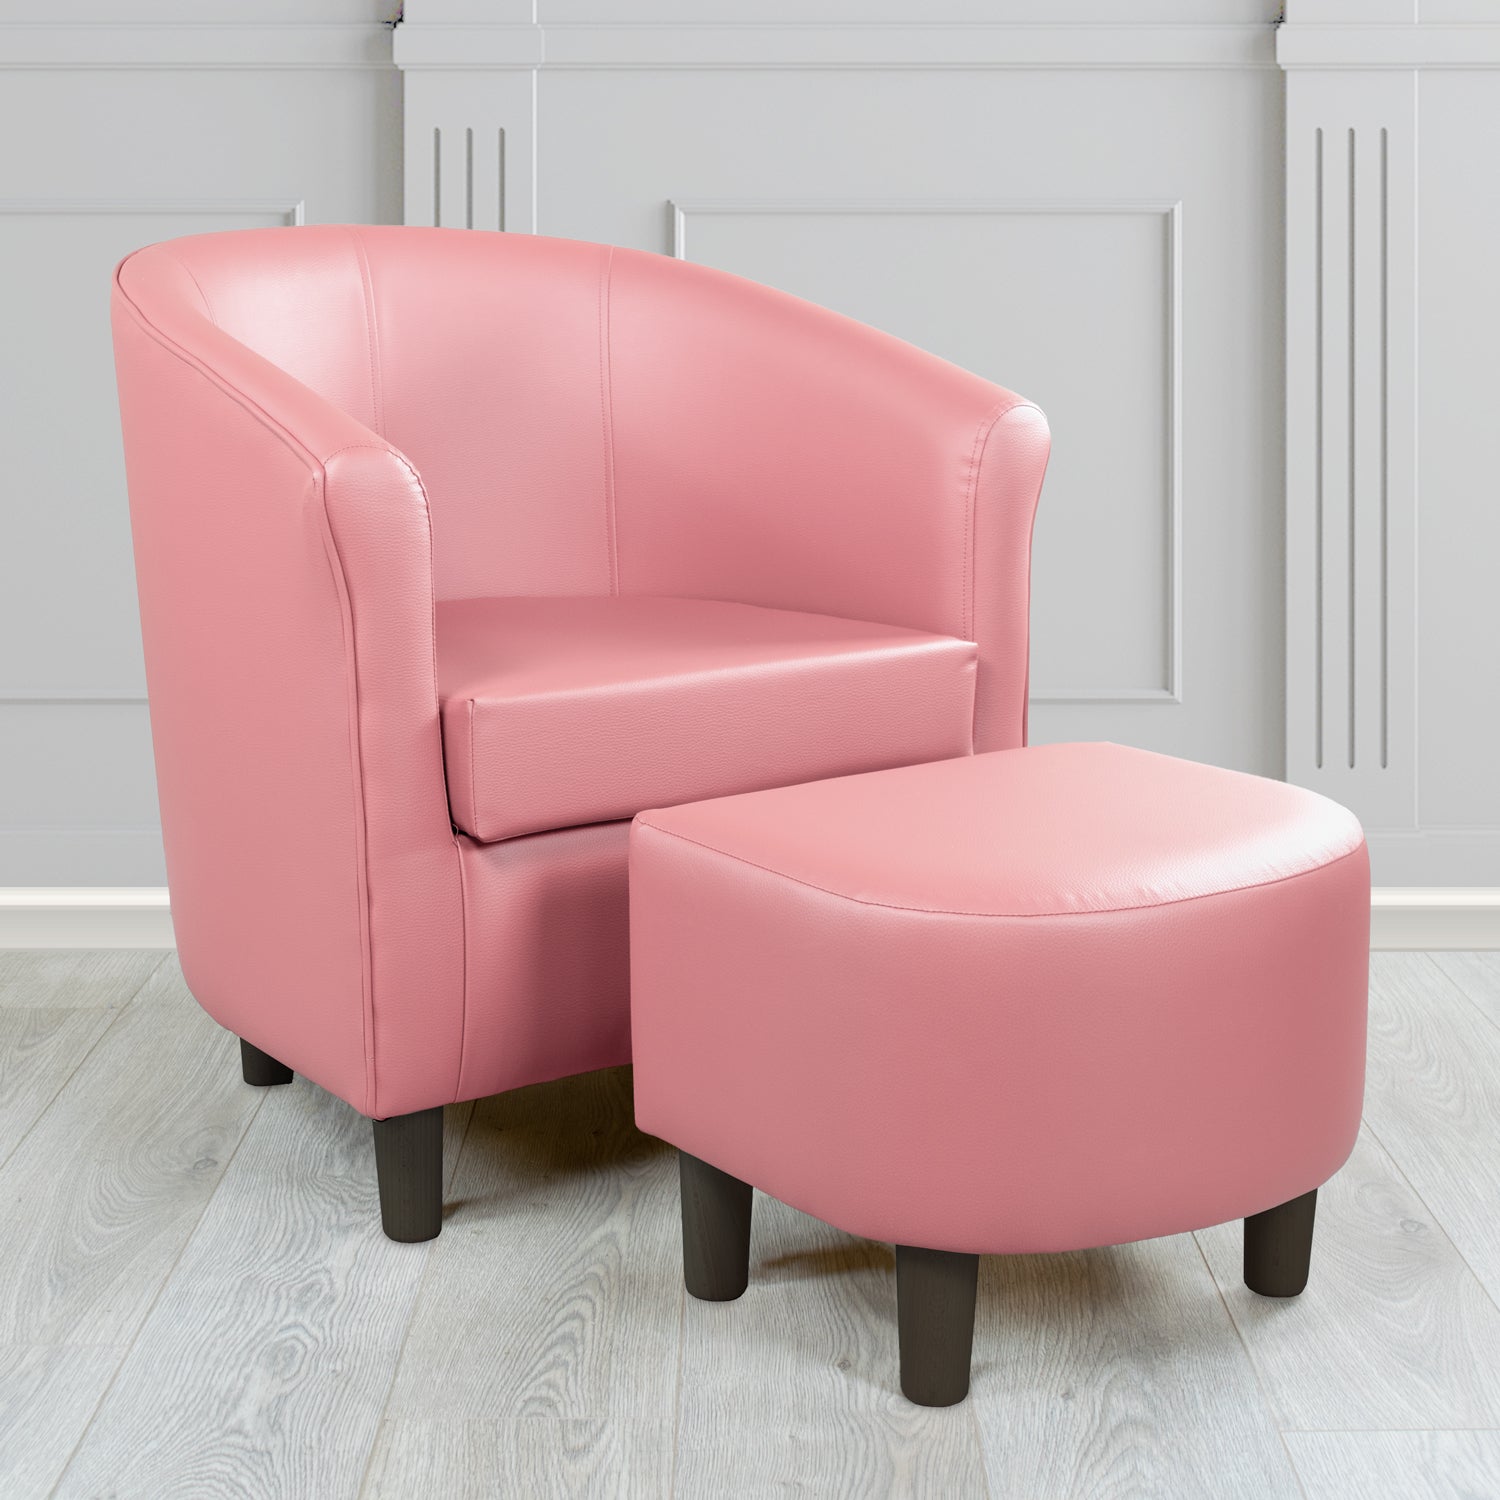 Tuscany Just Colour Cherry Blossom Faux Leather Tub Chair with Dee Footstool Set - The Tub Chair Shop